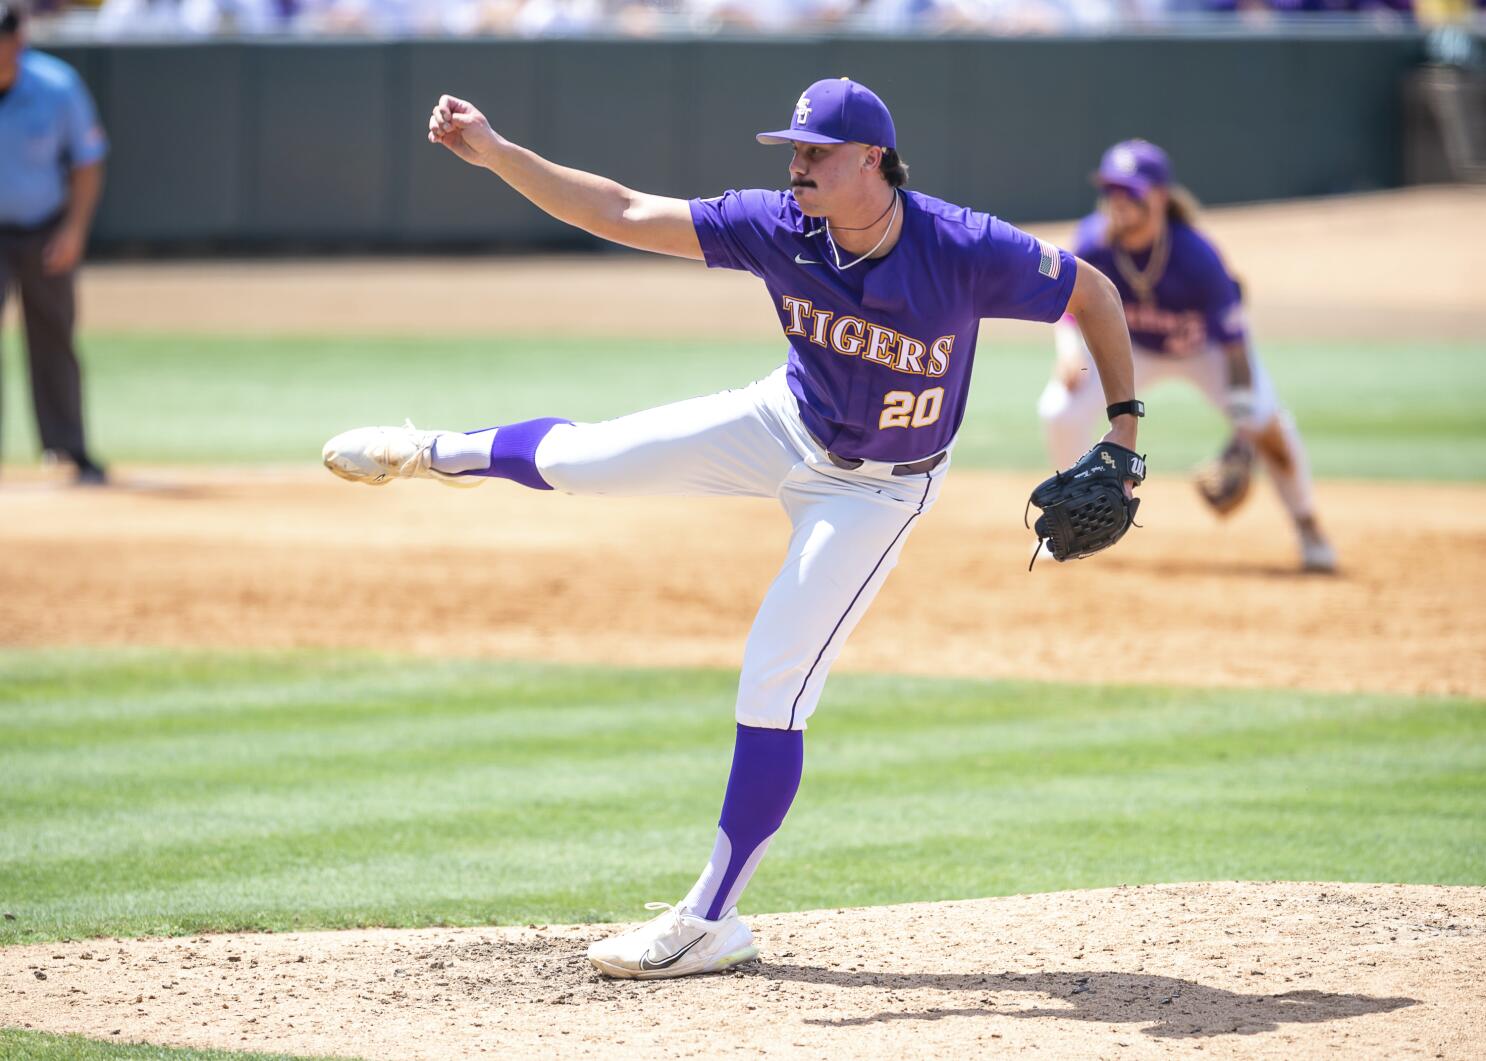 Baseball shows grit again, holds off Oral Roberts, 4-3 - The